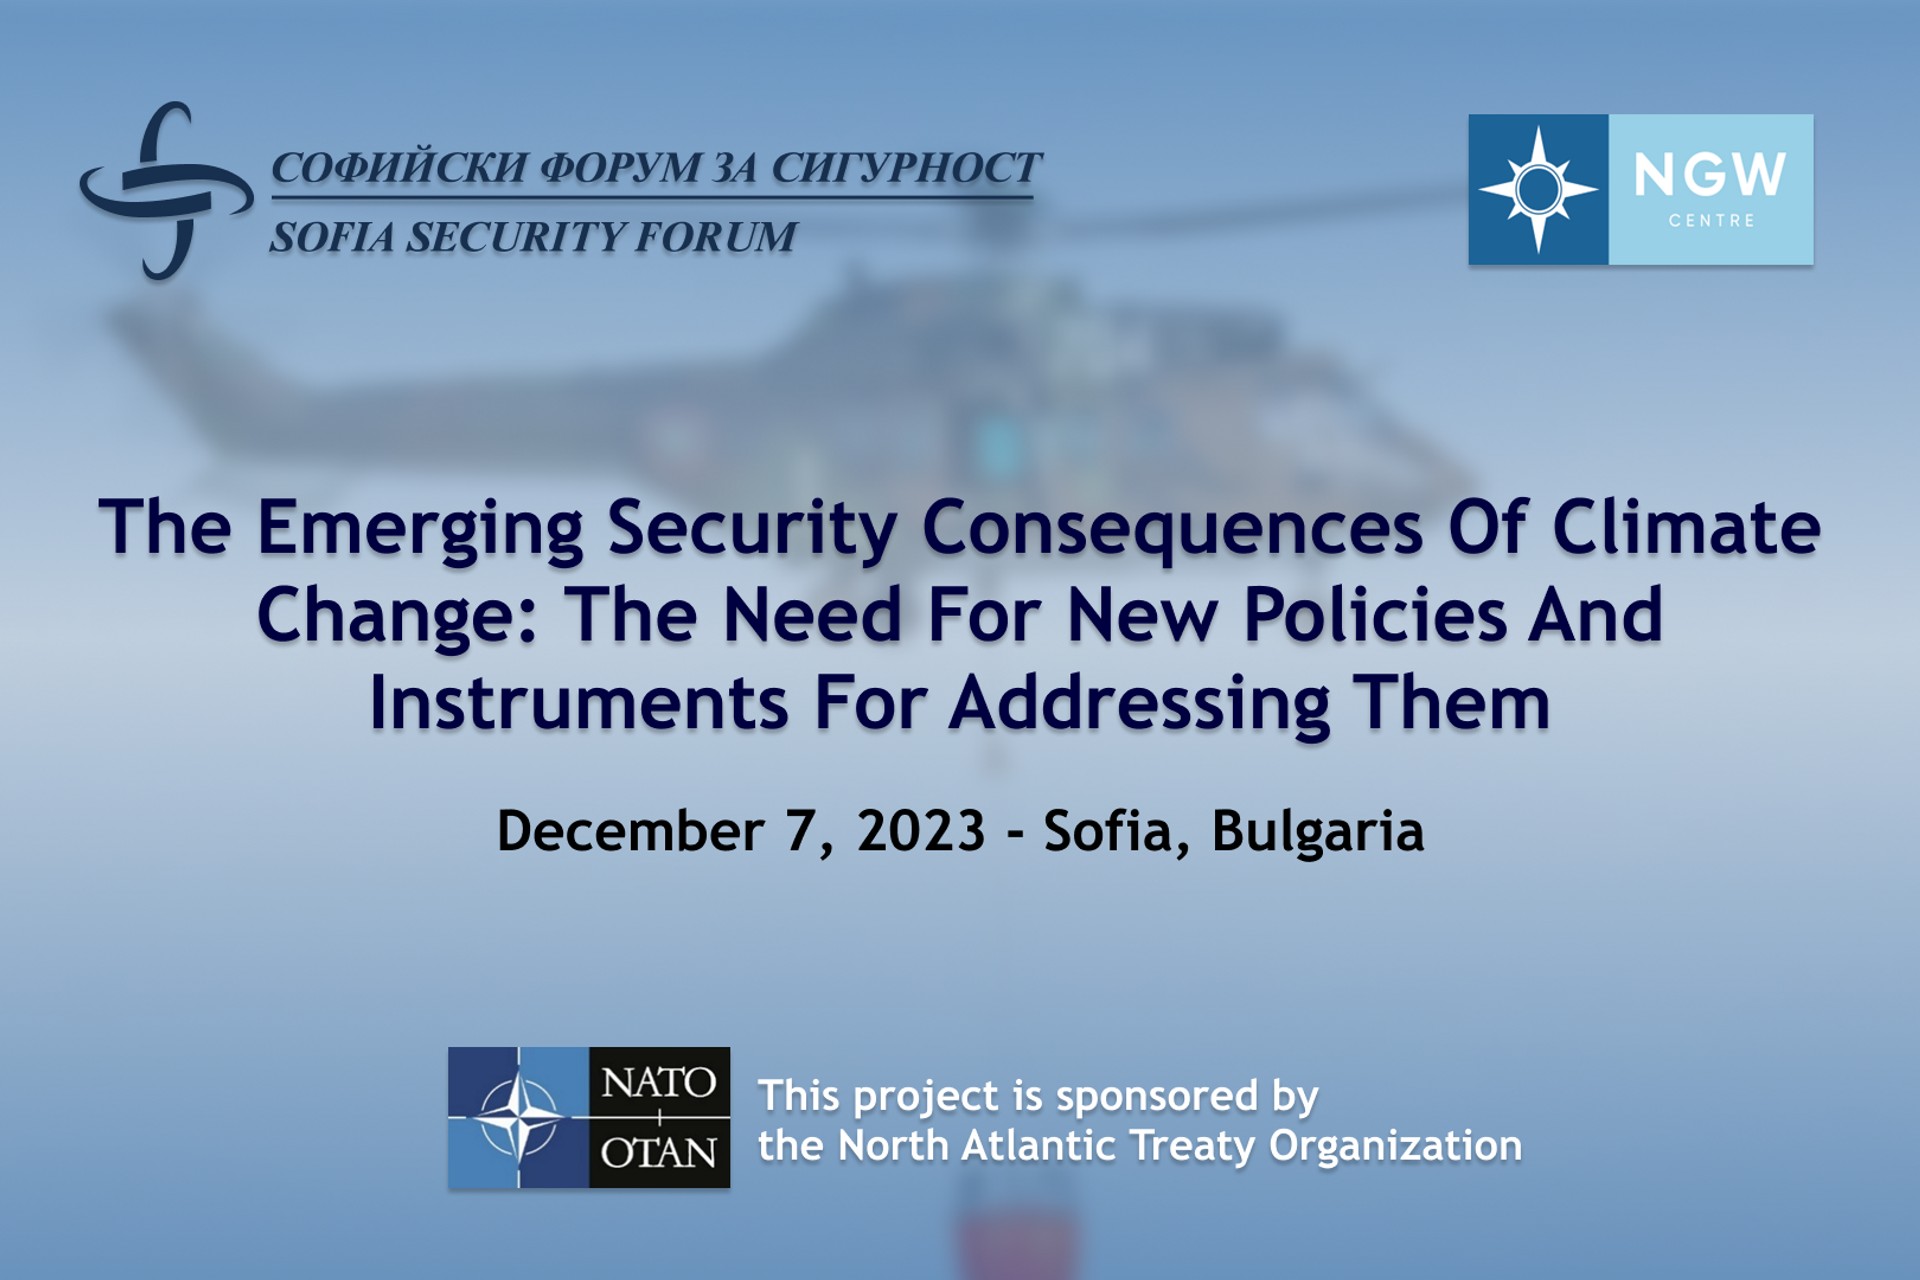 THE EMERGING SECURITY CONSEQUENCES OF CLIMATE CHANGE: THE NEED FOR NEW POLICIES AND INSTRUMENTS